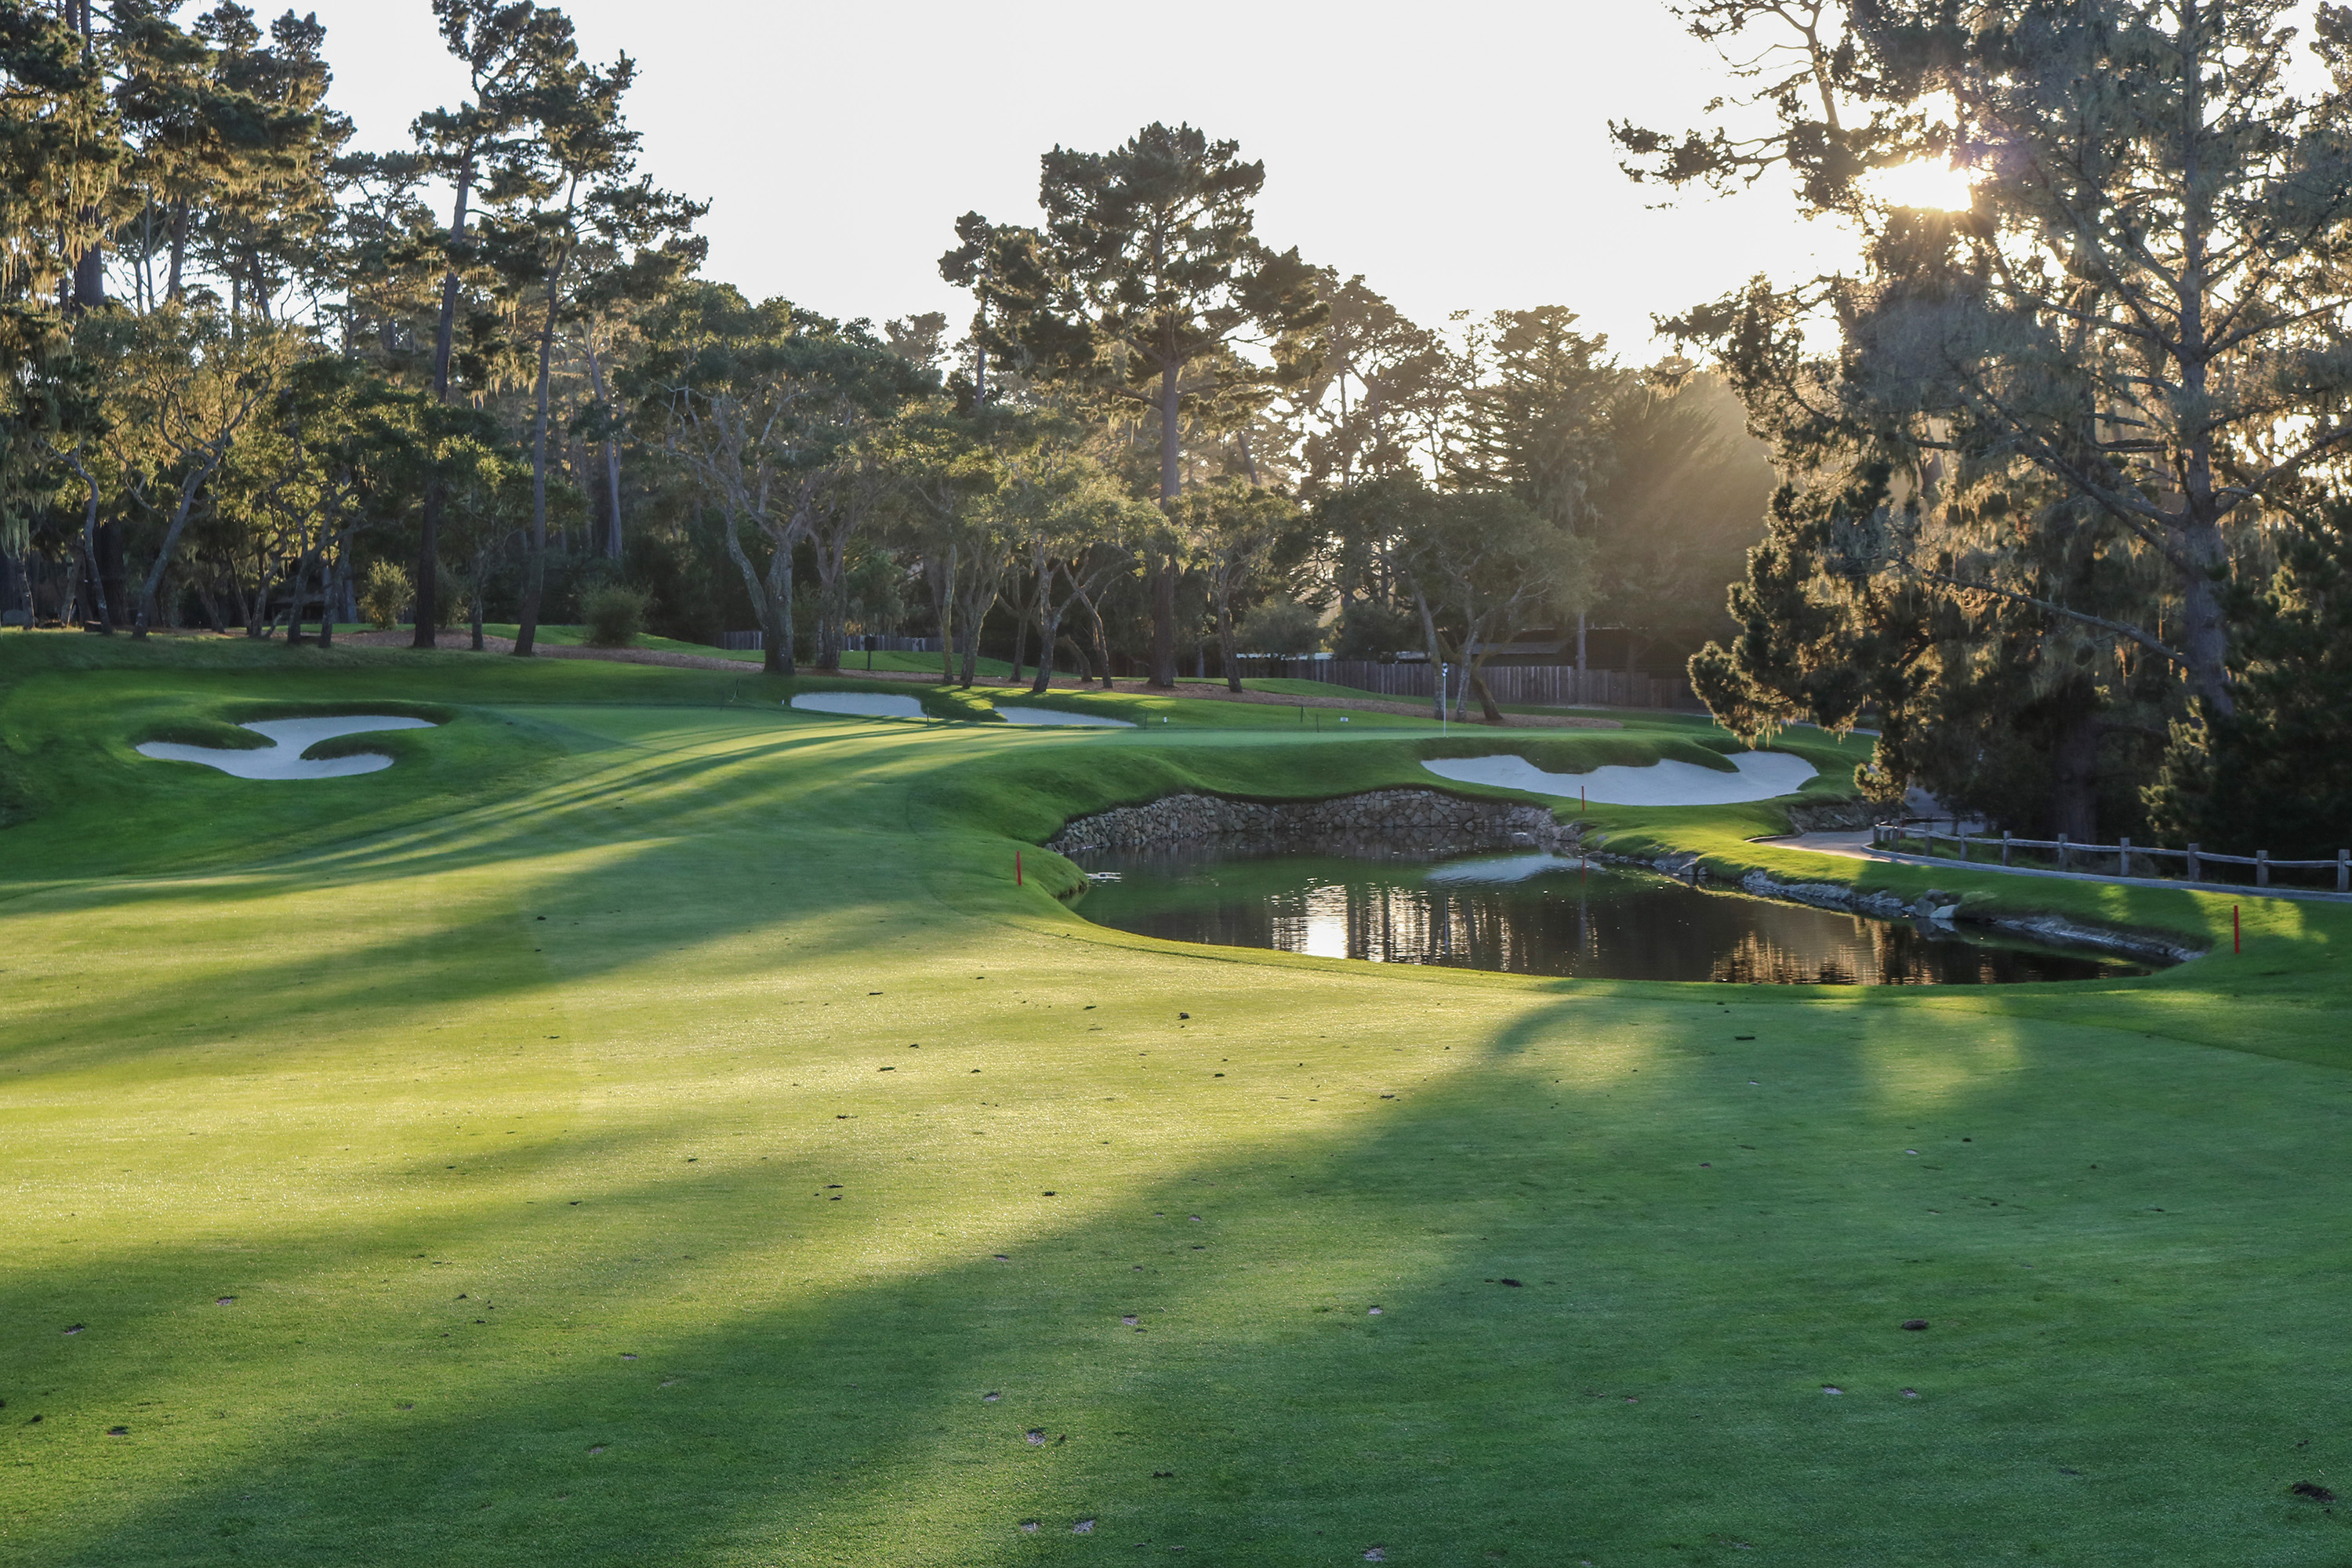 14th hole at Spyglass Hill